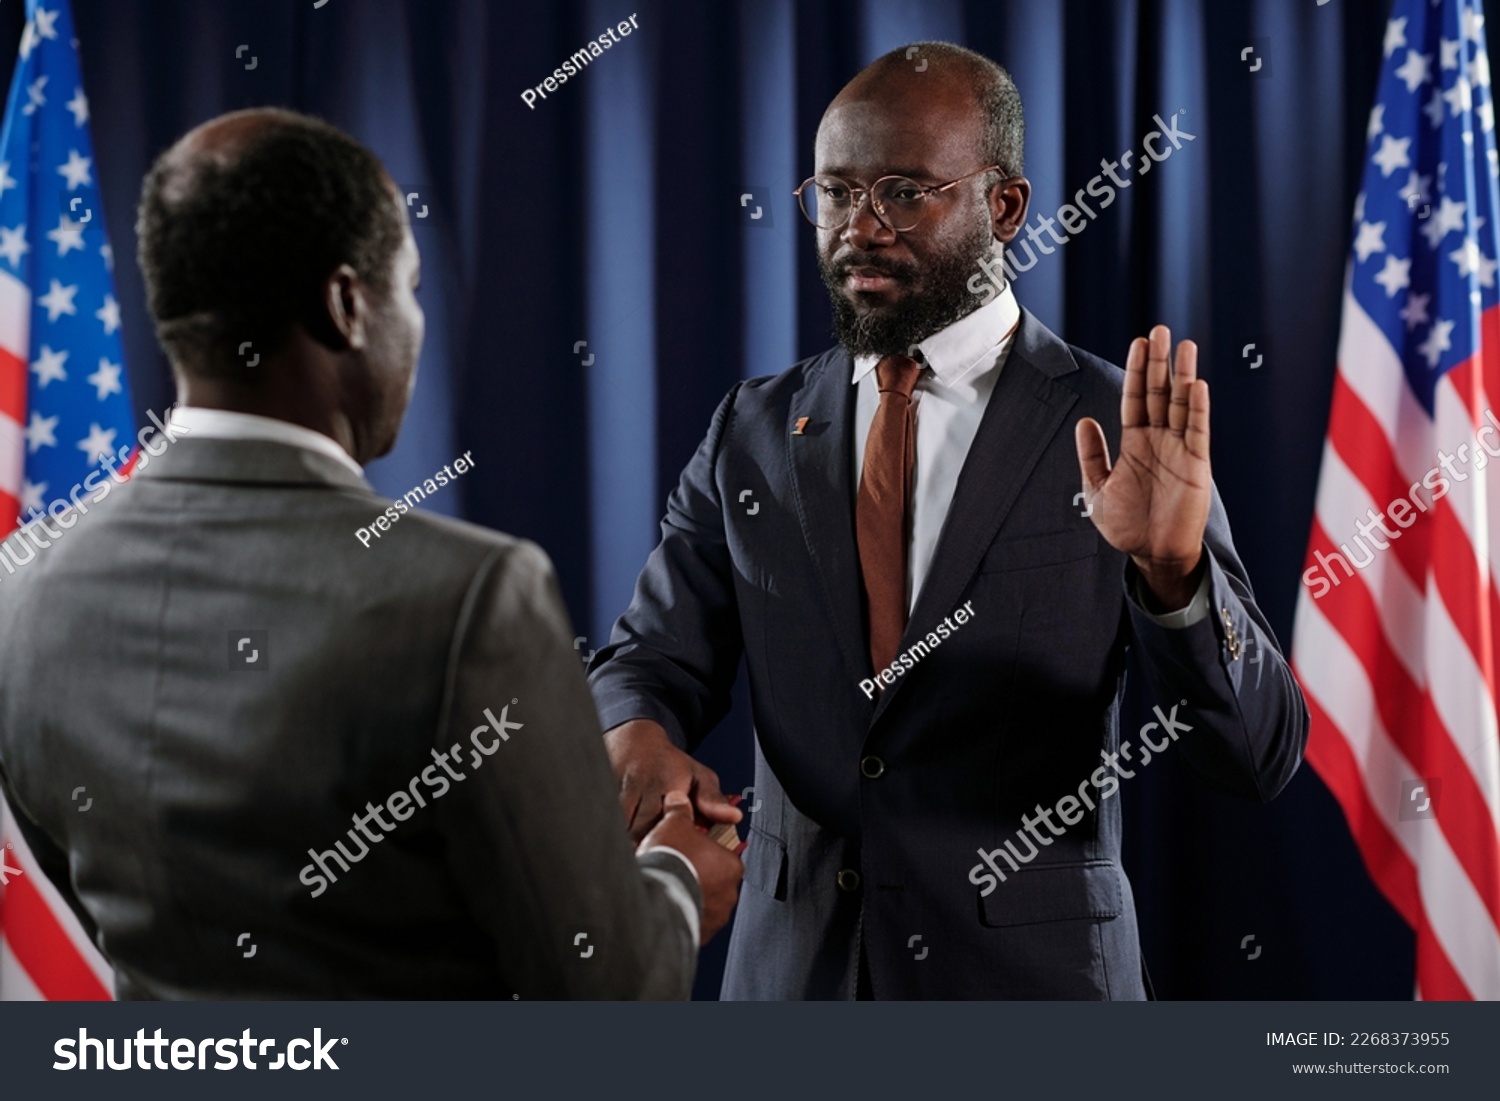 Serious young African American male president pronouncing oath of office with his right hand on Holy Bible while keeping open left one #2268373955